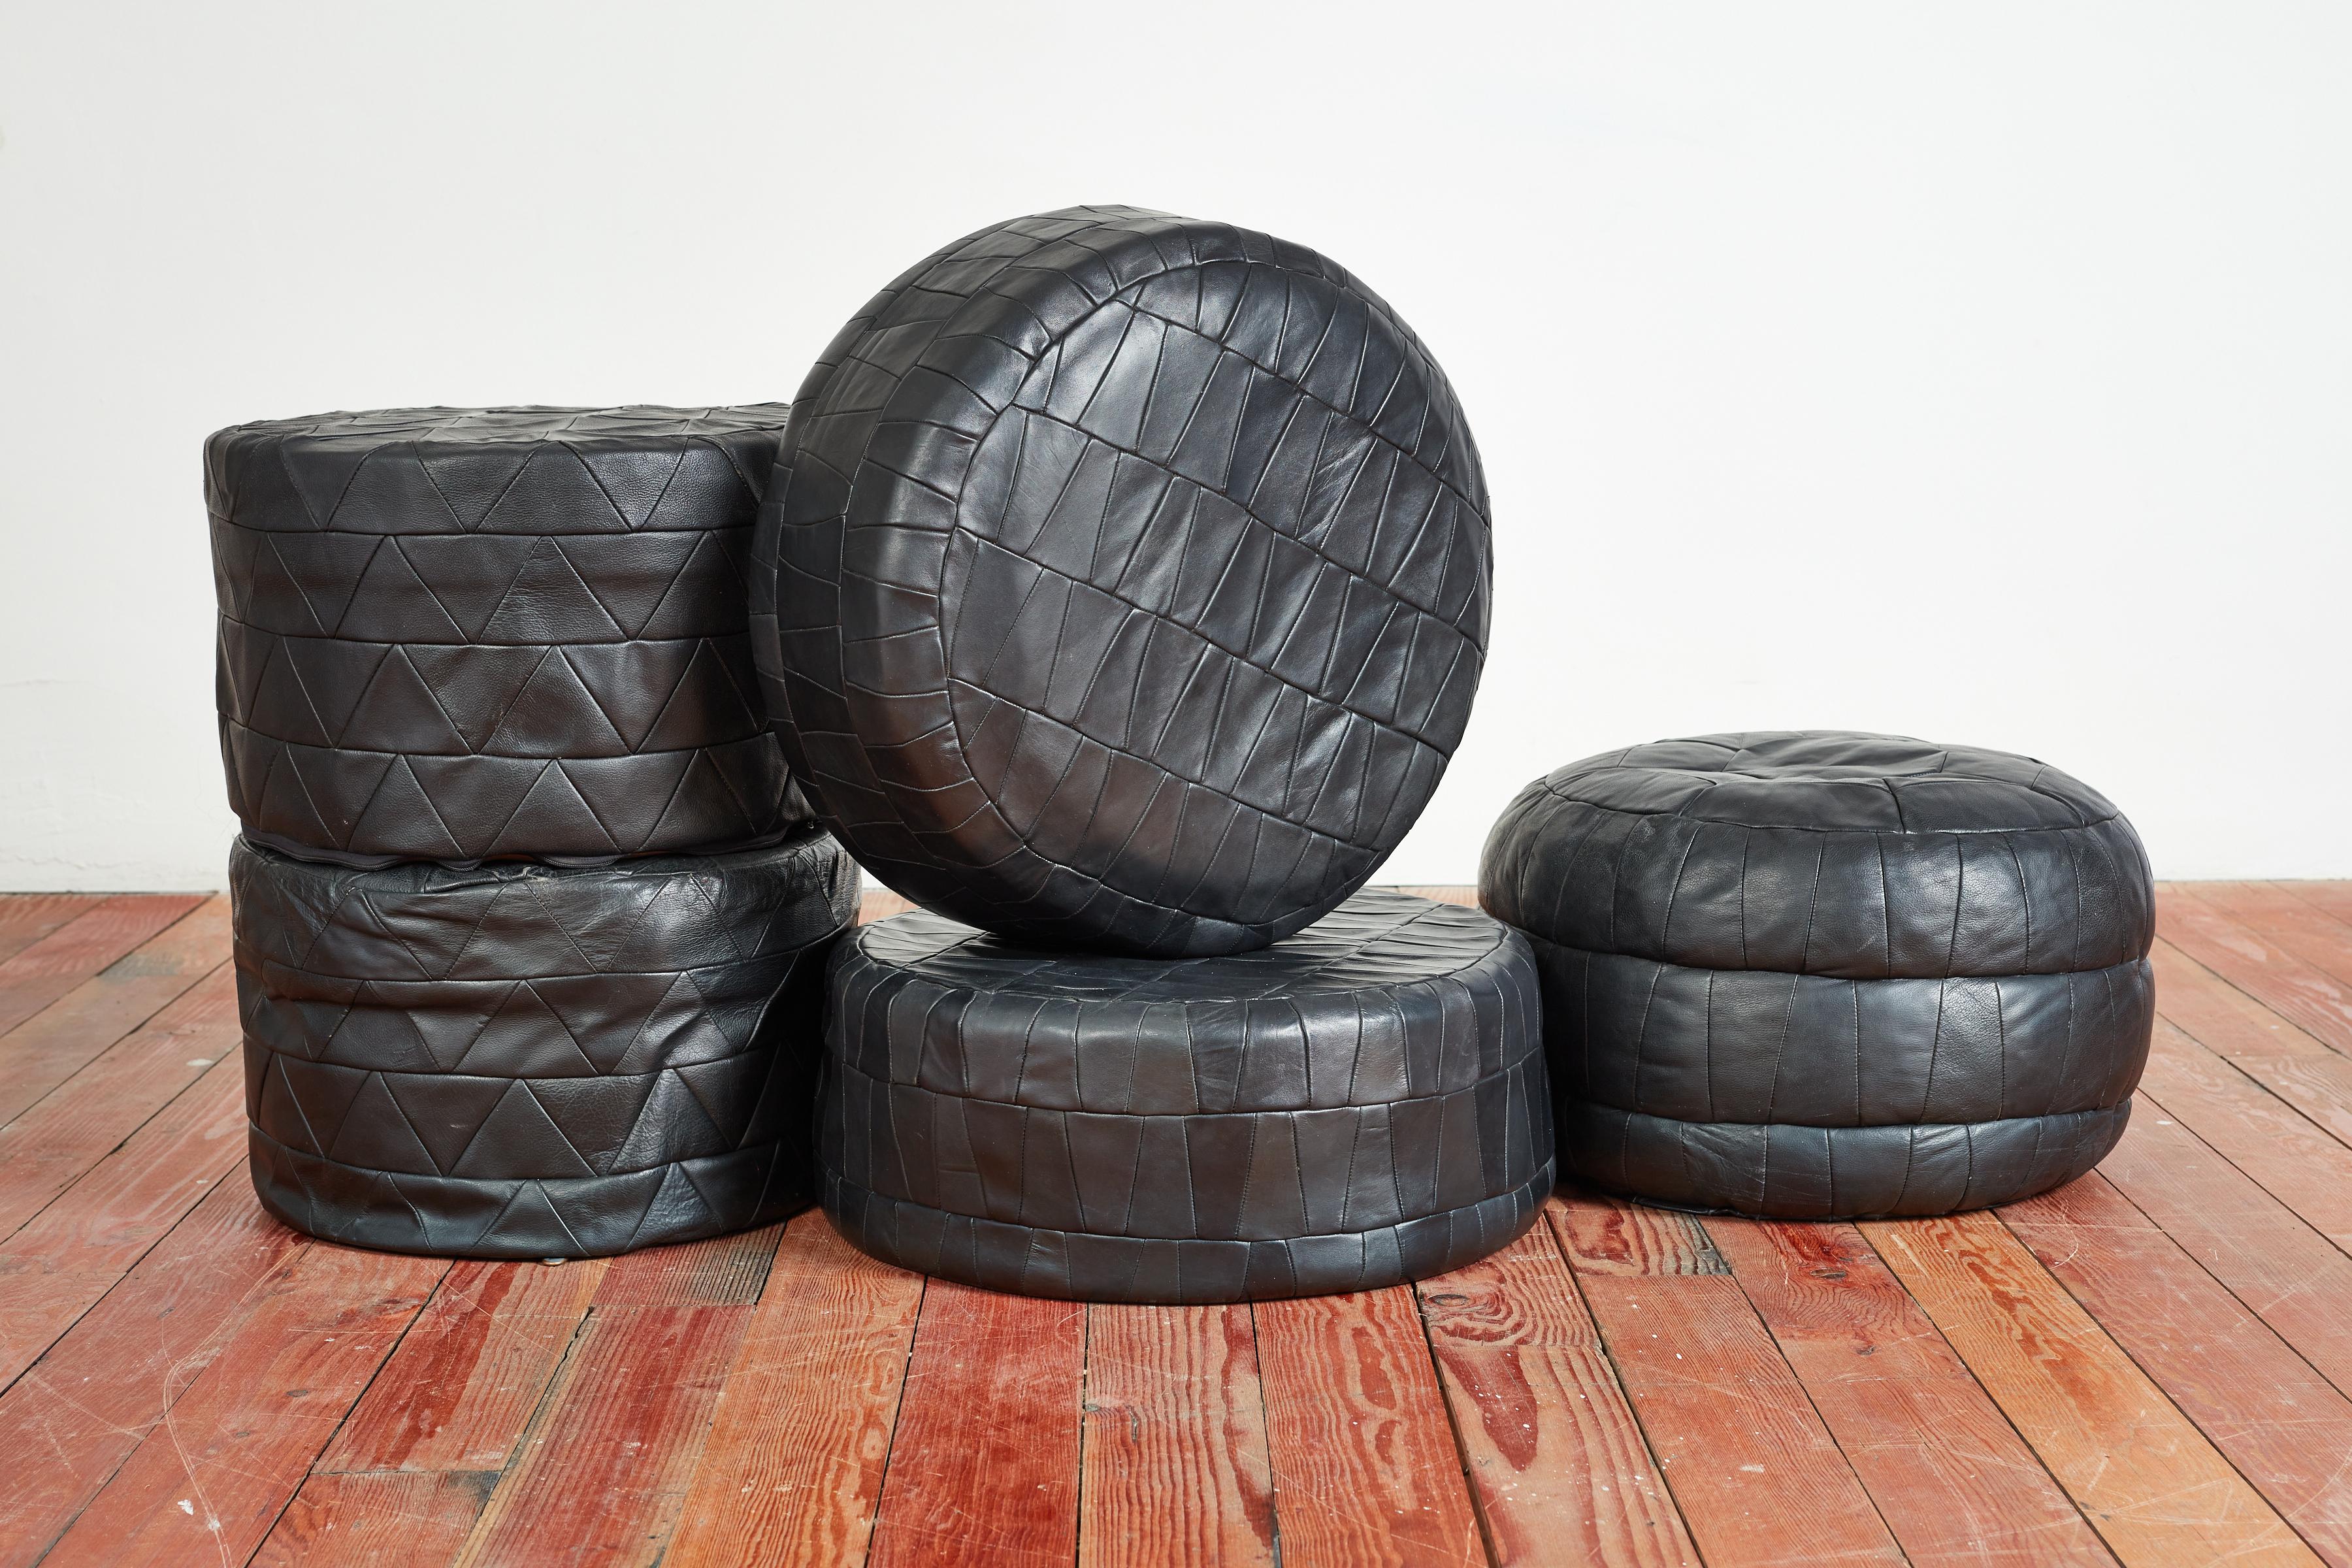 Large collection of patchwork leather ottomans by Swiss designer De Sede. Original soft leather with beautiful patina and age. Multiple colors, sizes and shapes available - inquire for specific details.